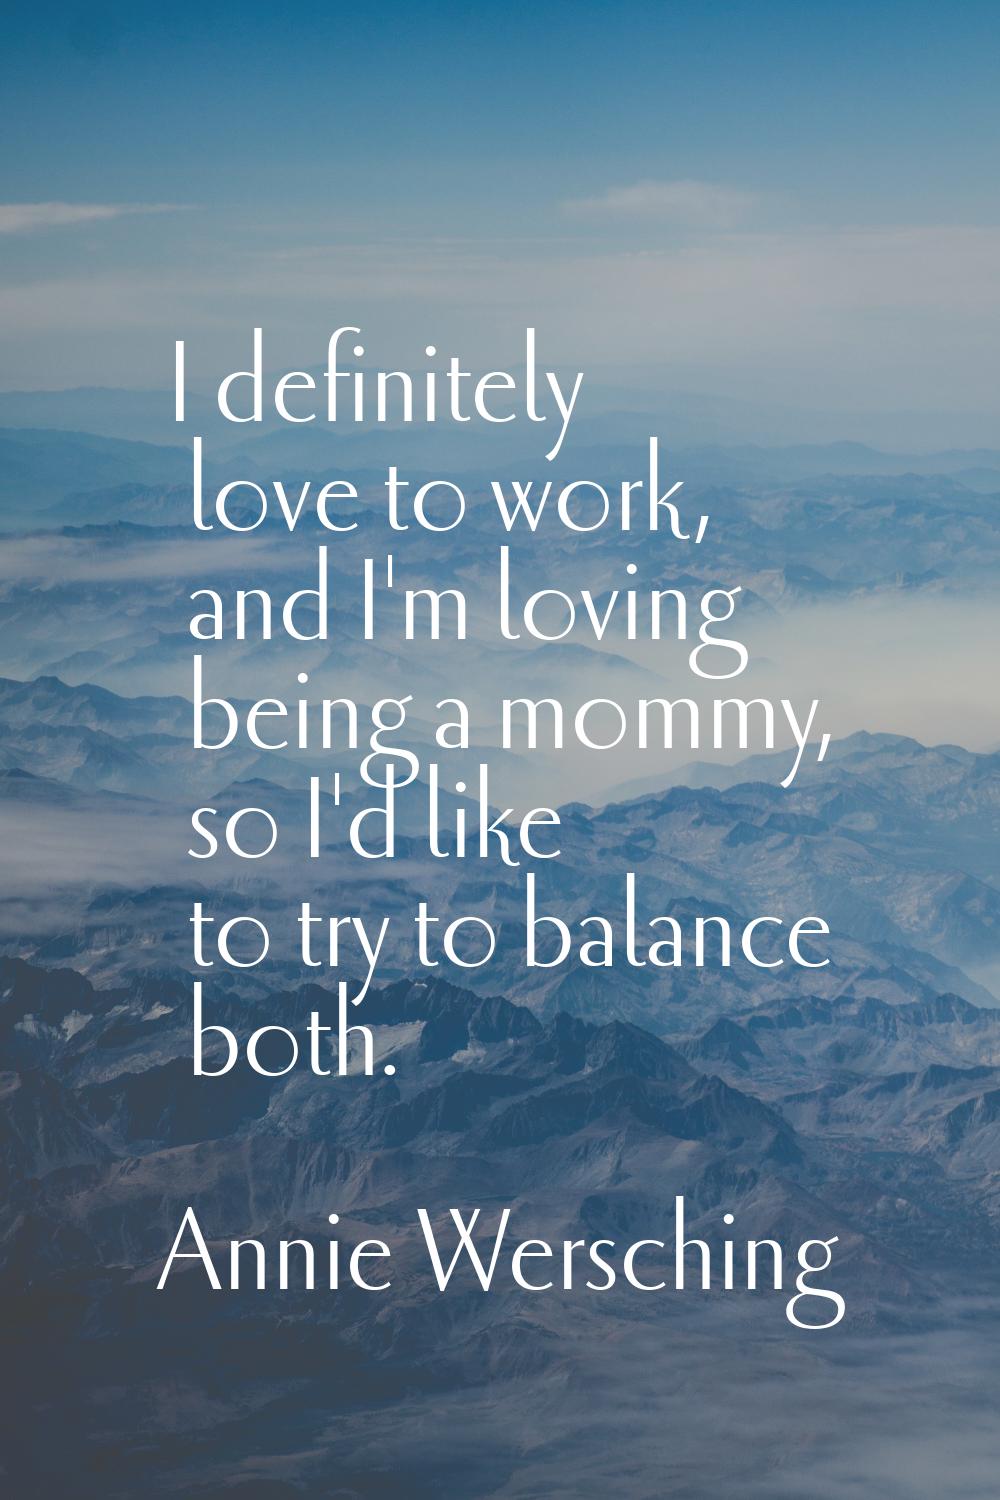 I definitely love to work, and I'm loving being a mommy, so I'd like to try to balance both.